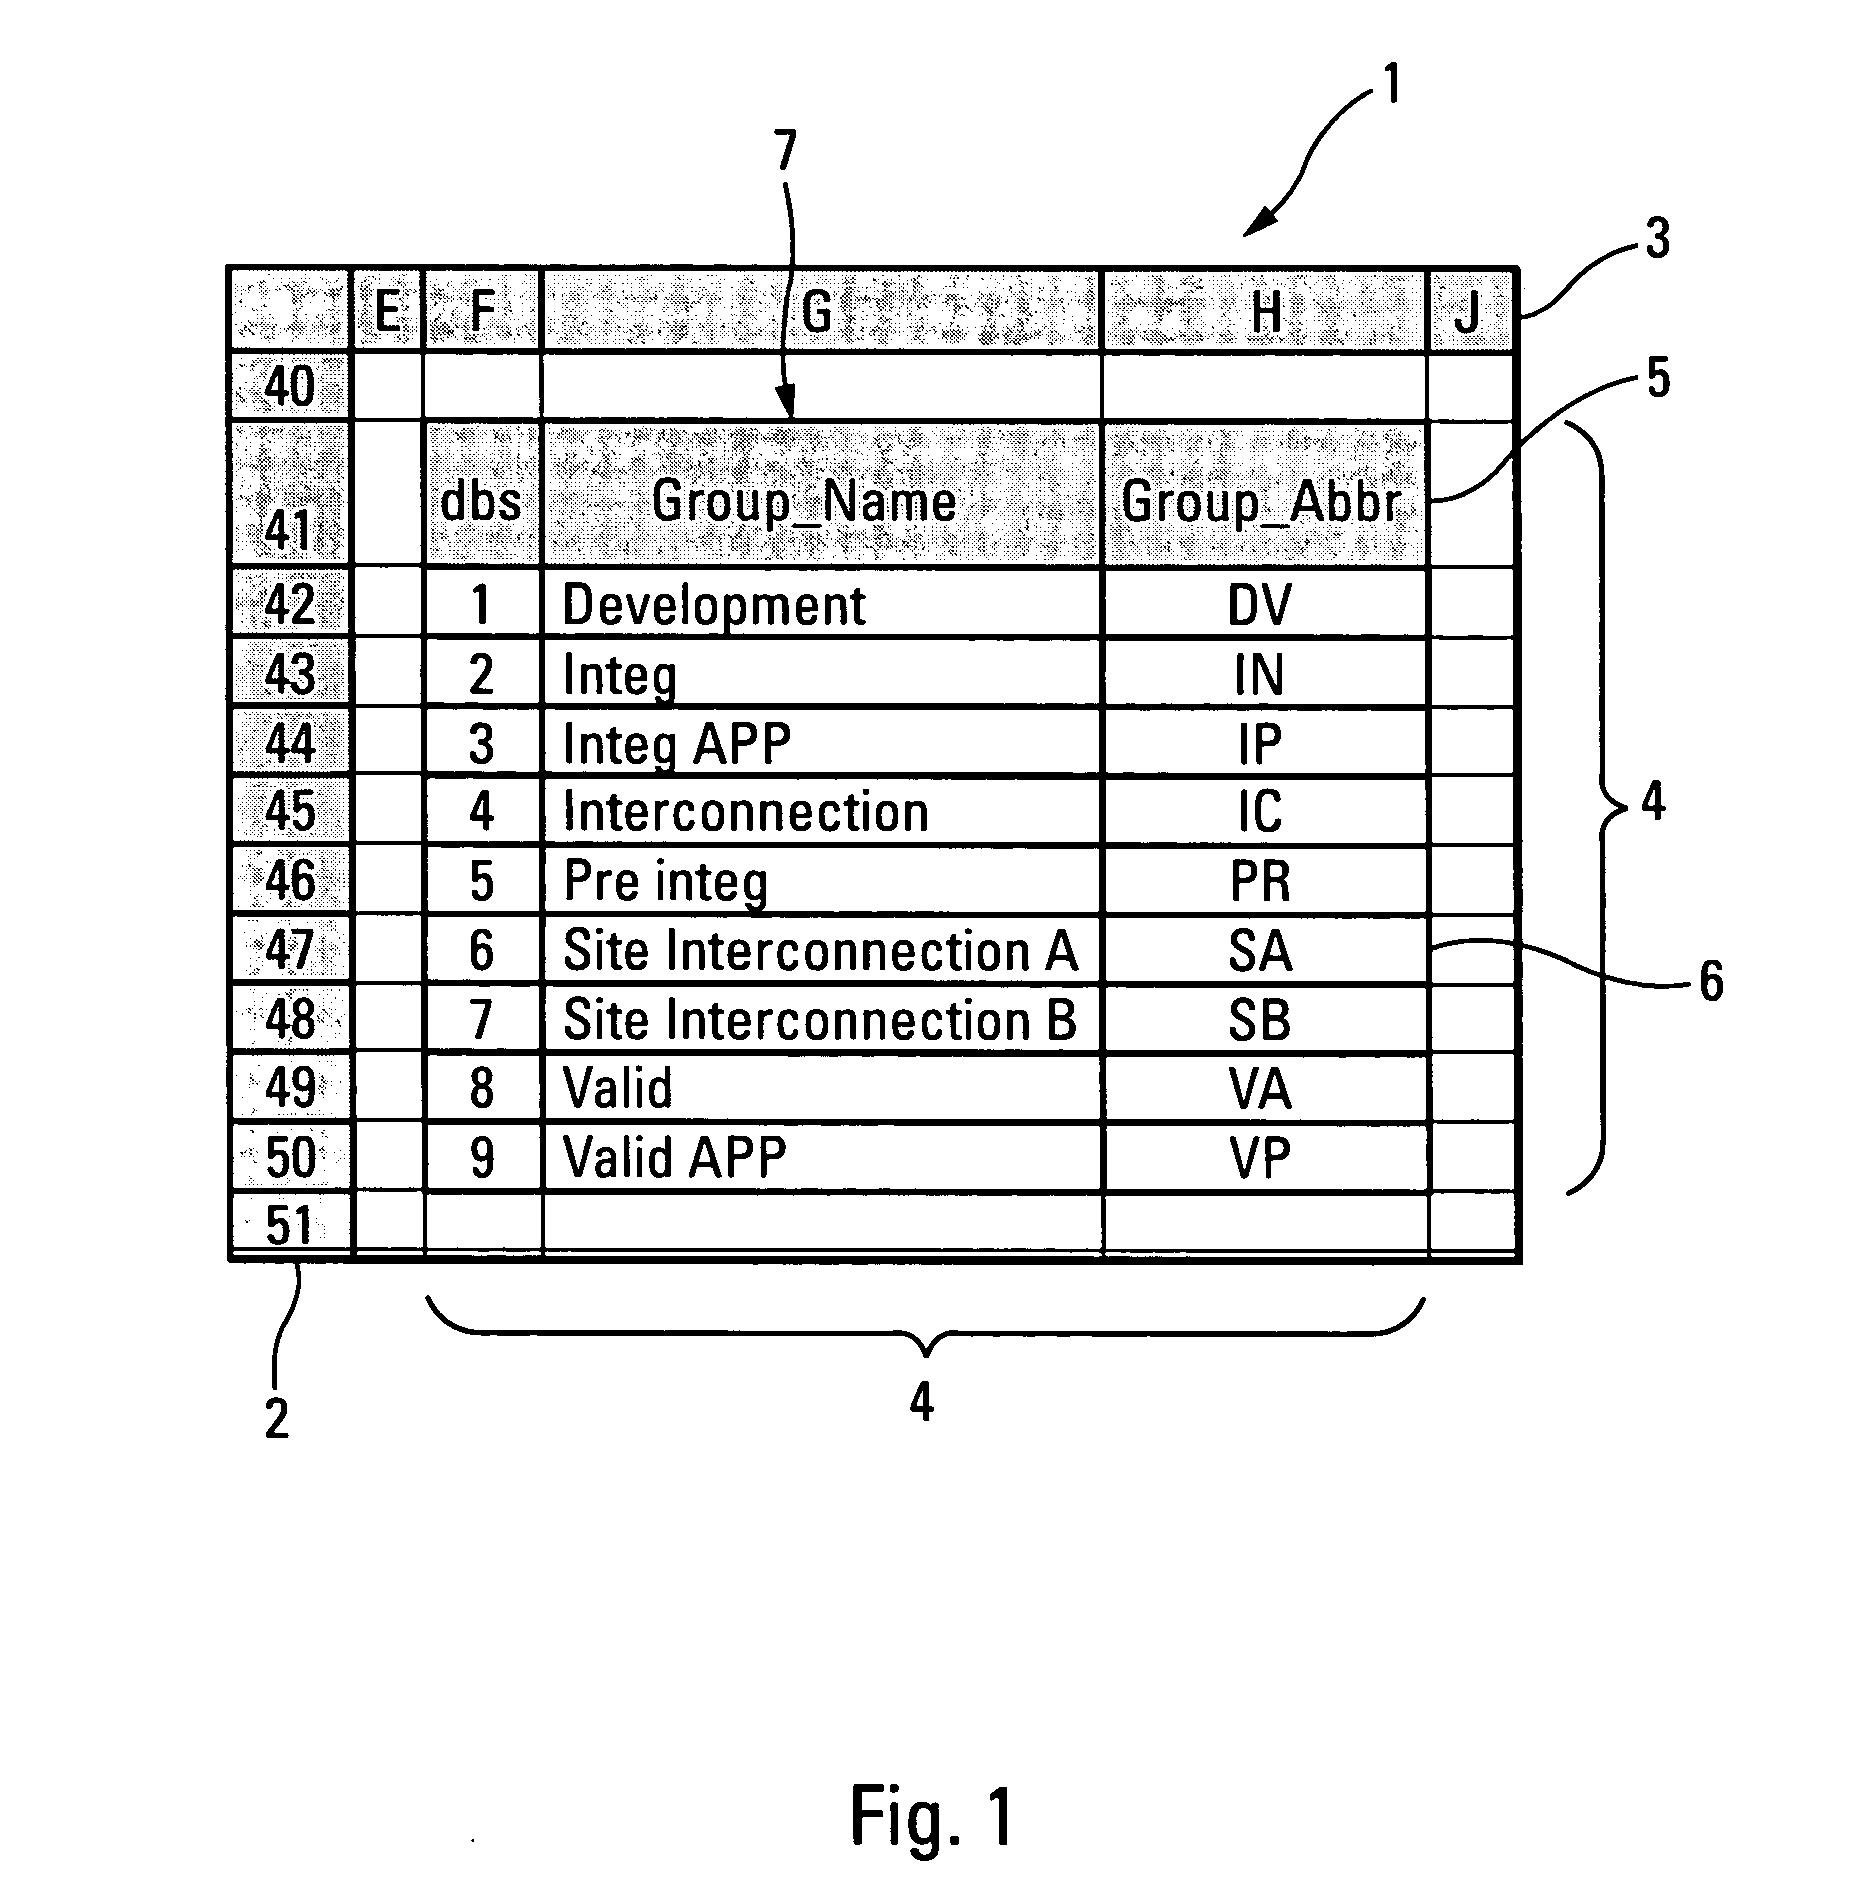 Method of updating a database created with a spreadsheet program